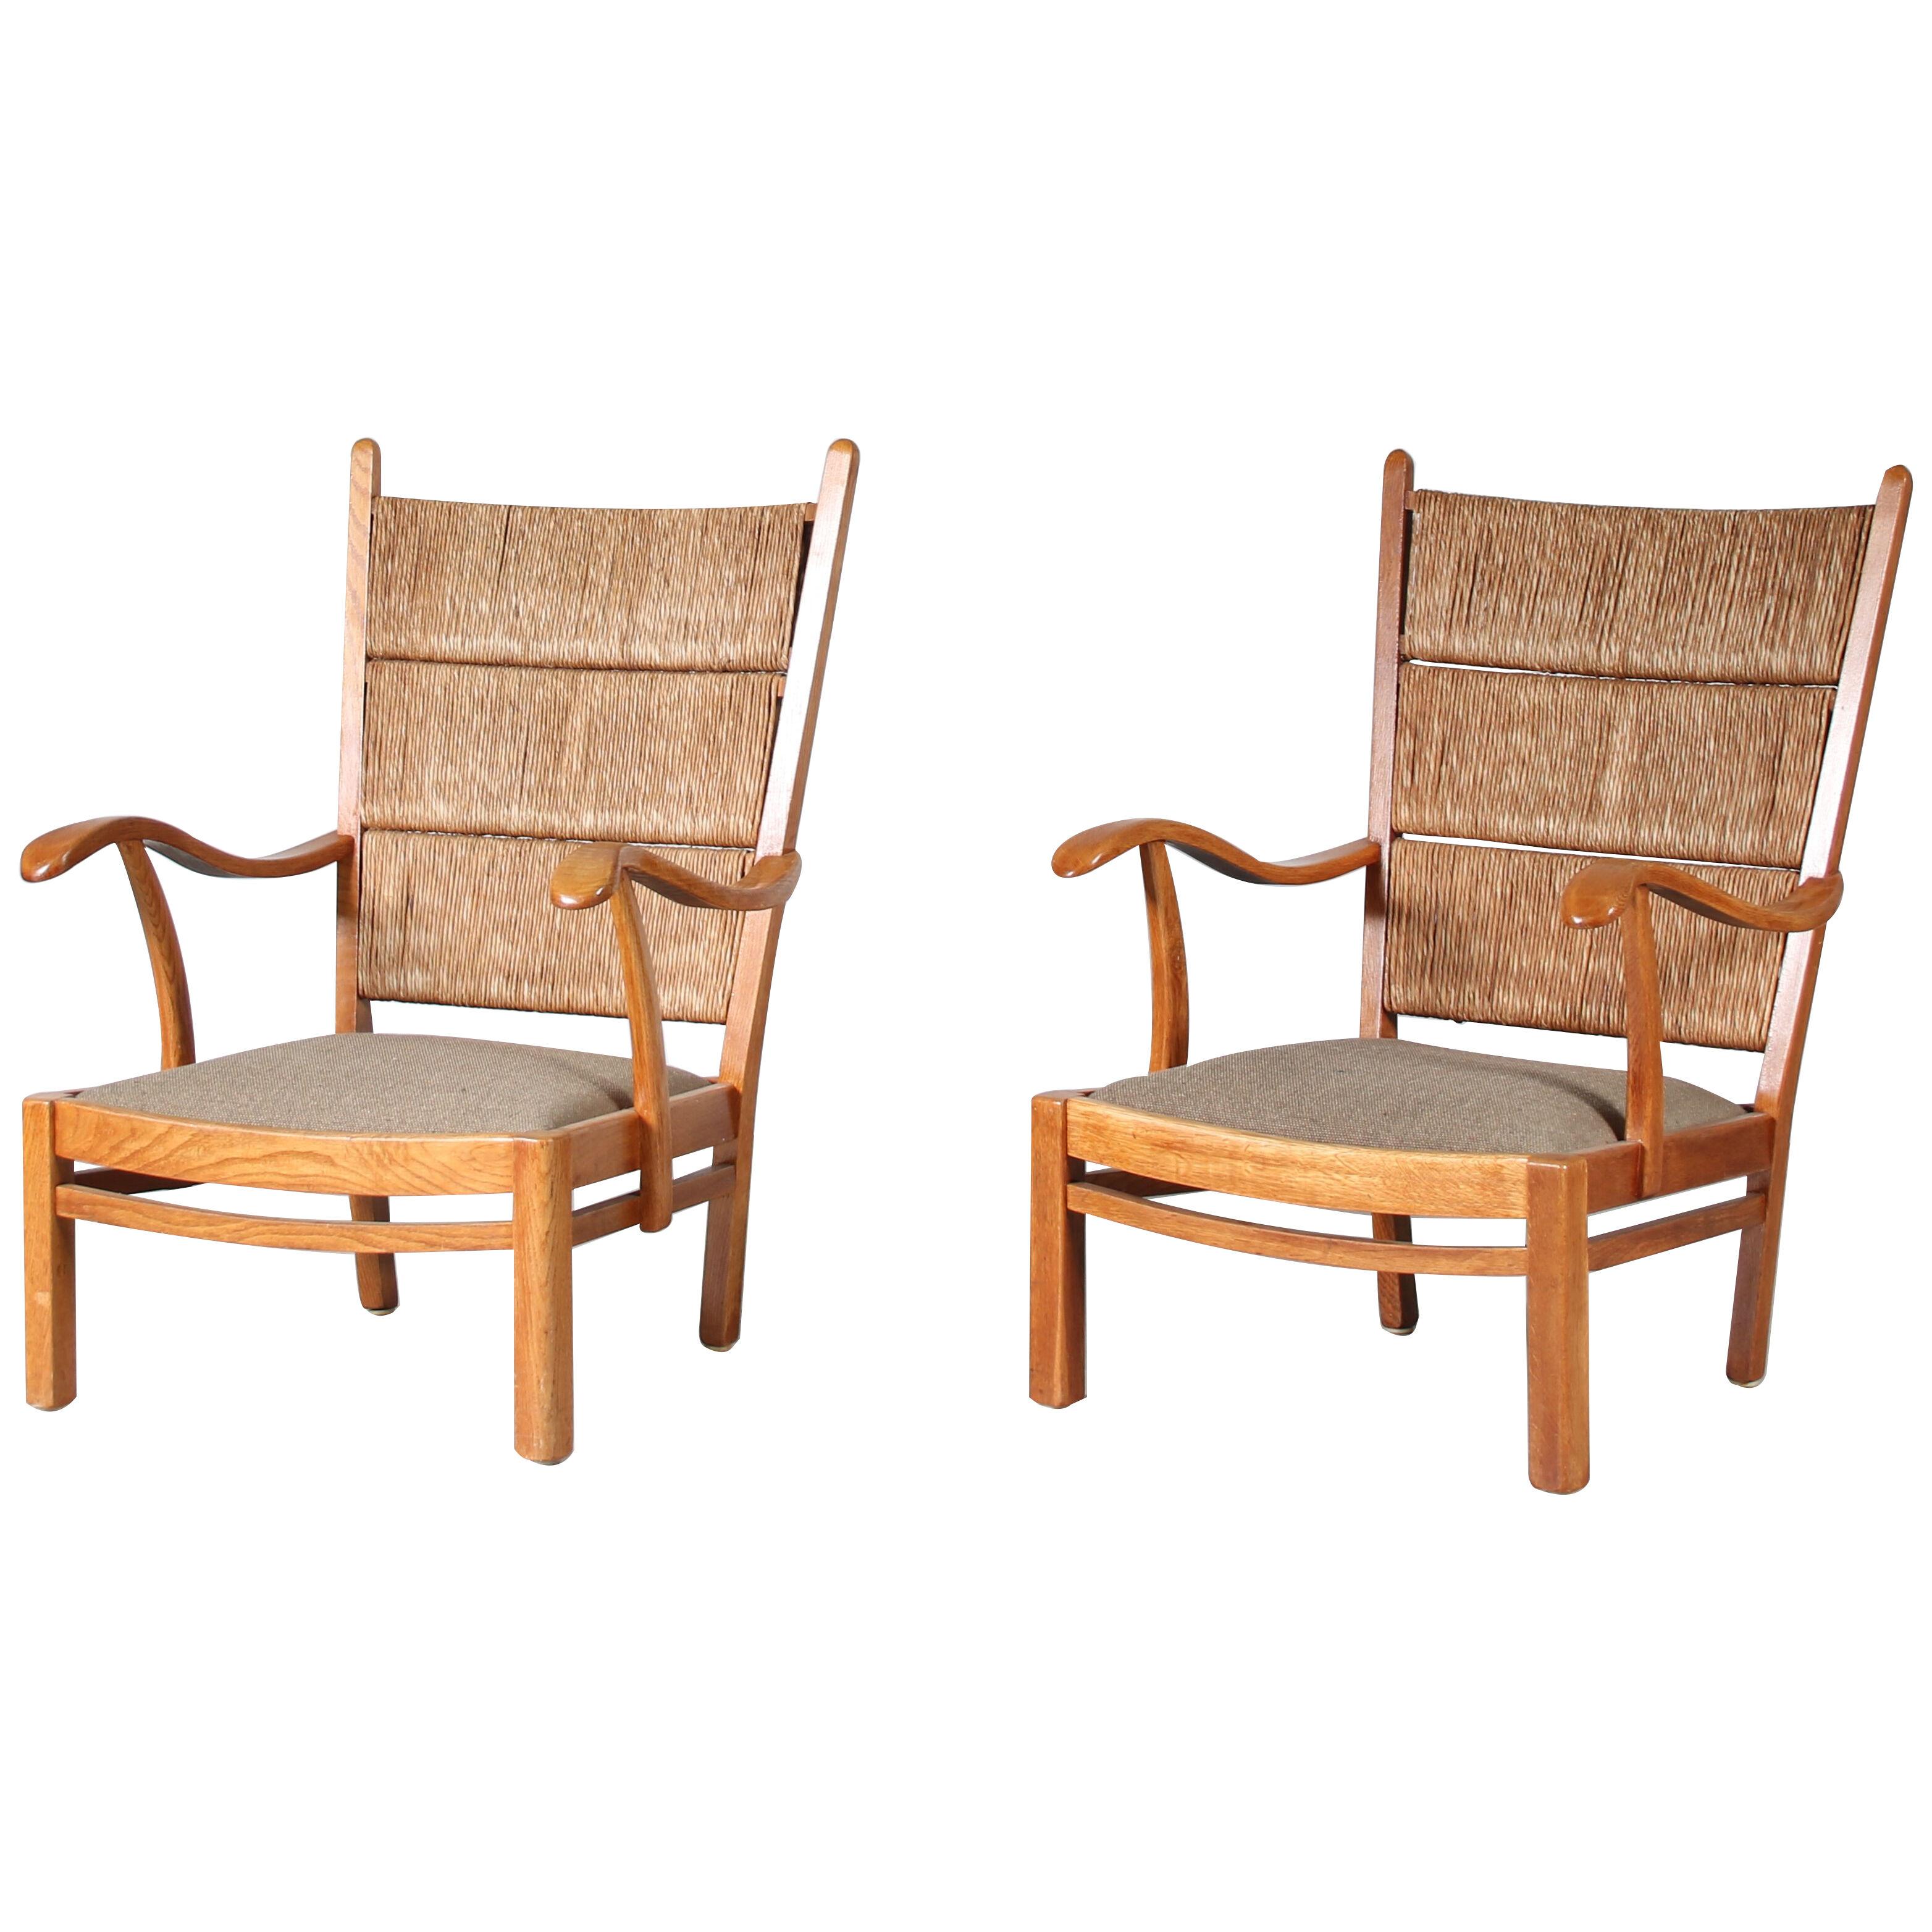 Pair of Bas van Pelt Lounge Chairs for MyHome, Netherlands 1950